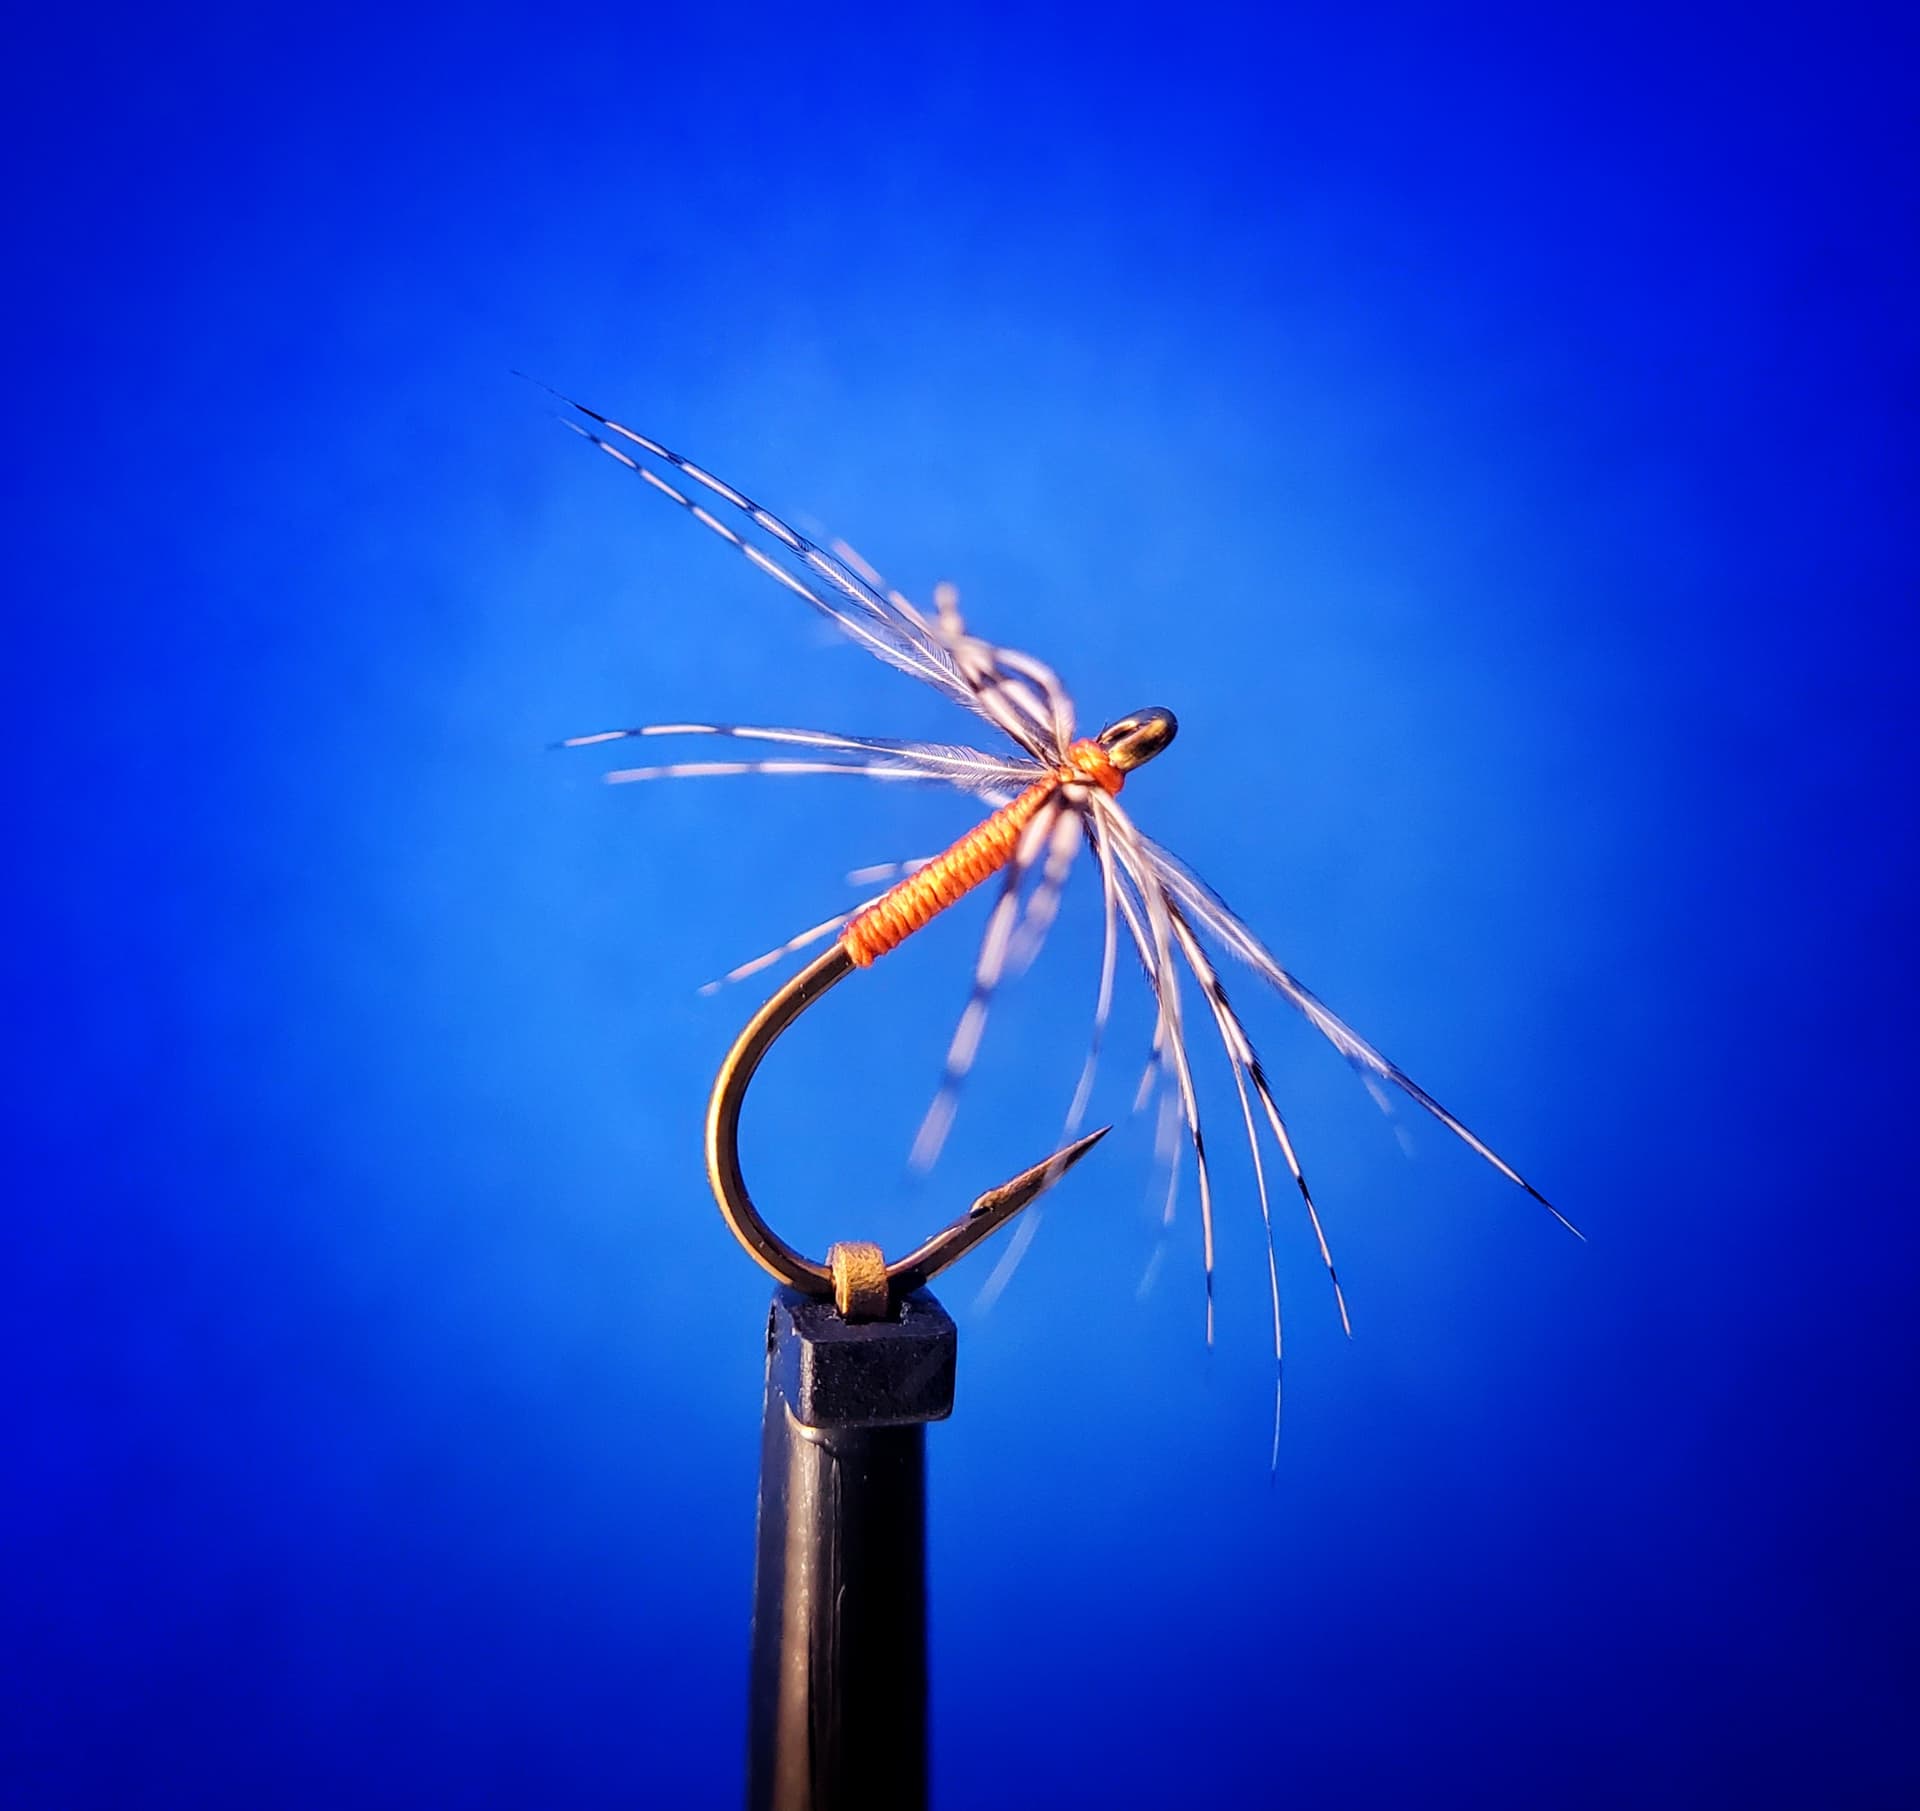 North Country Spiders and their use - Tenkara - 10 Colors Tenkara